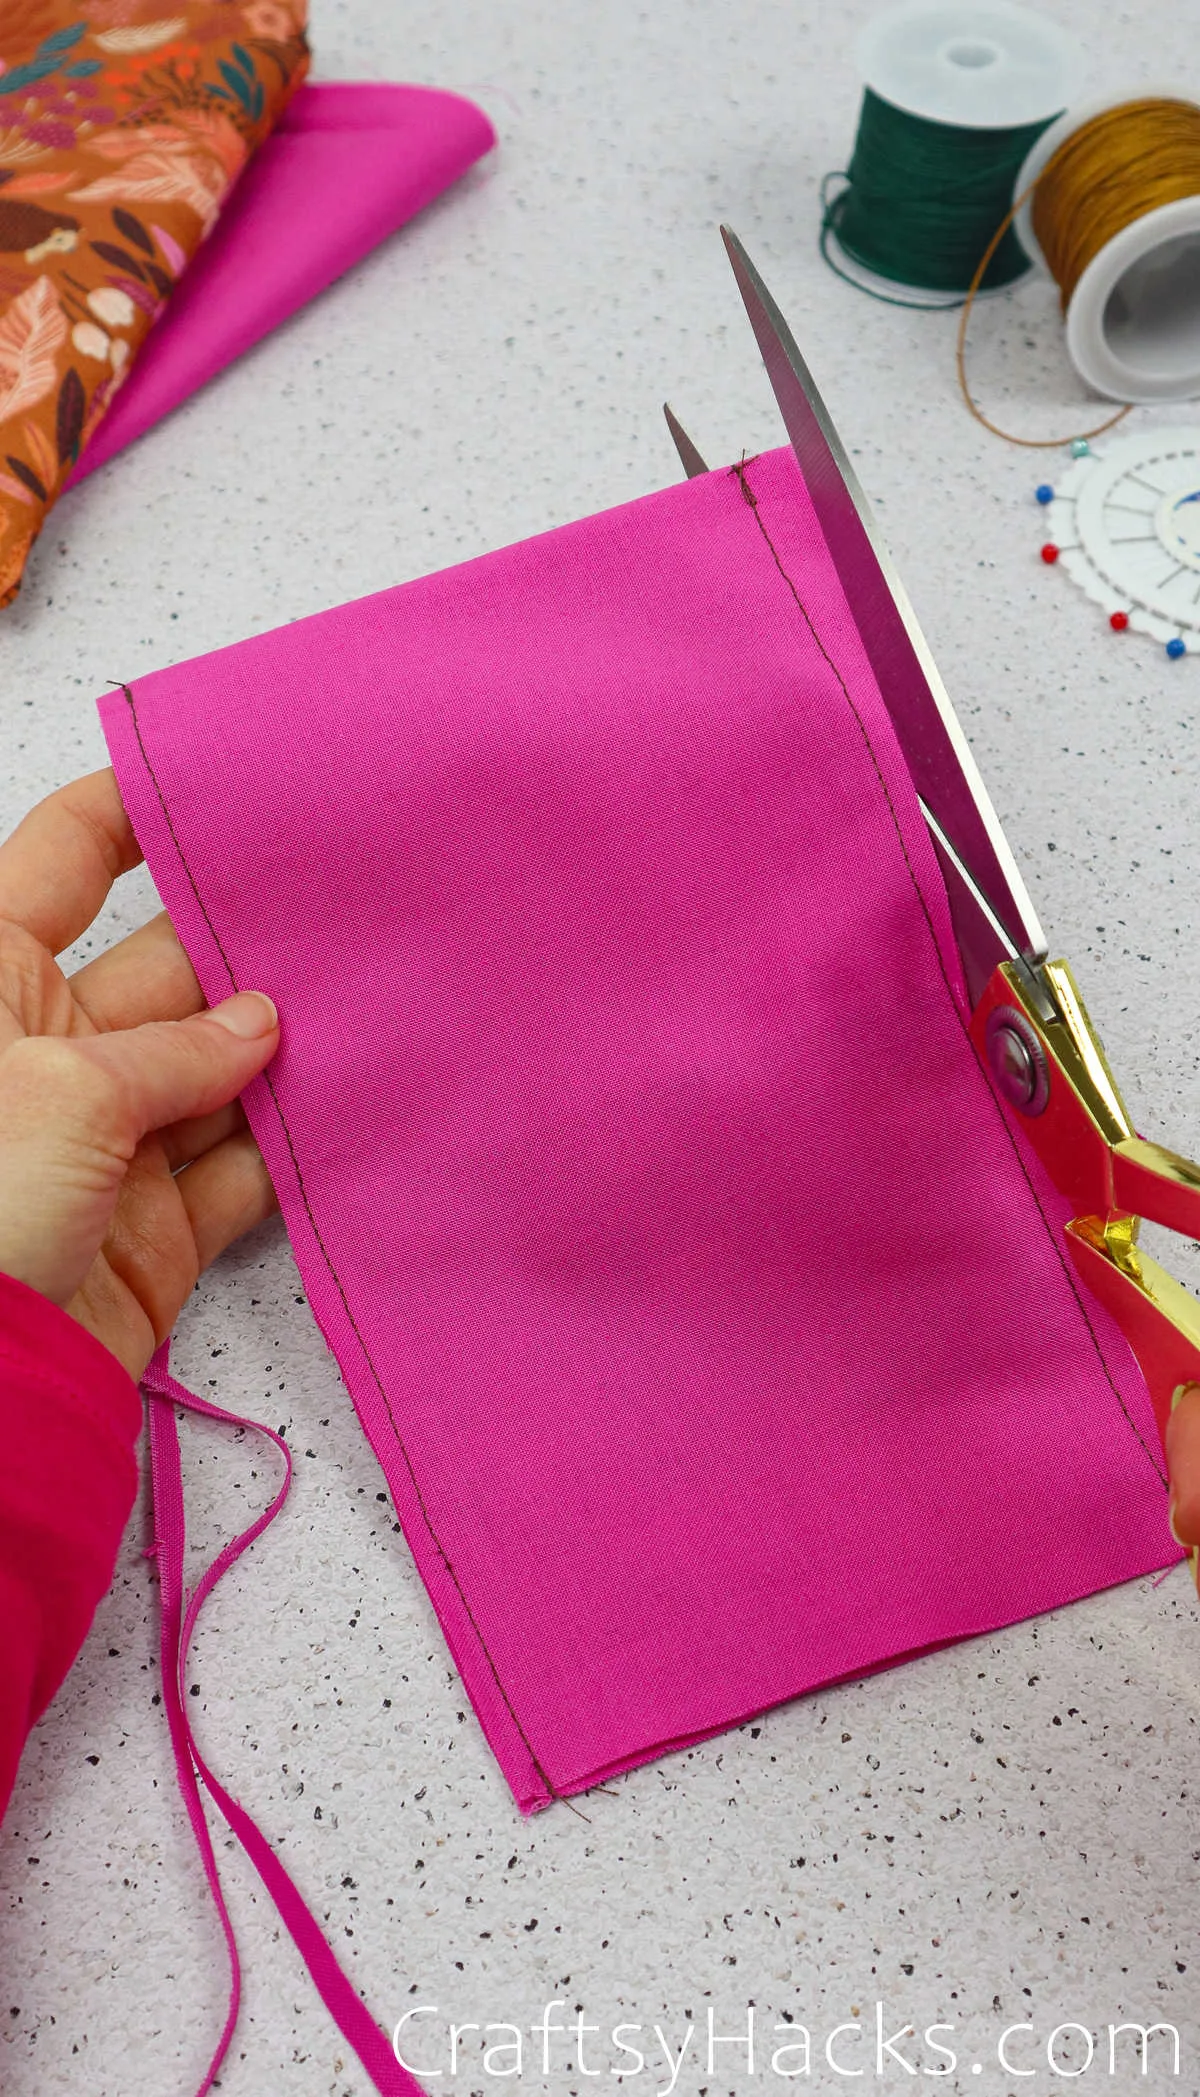 cutting excess fabric